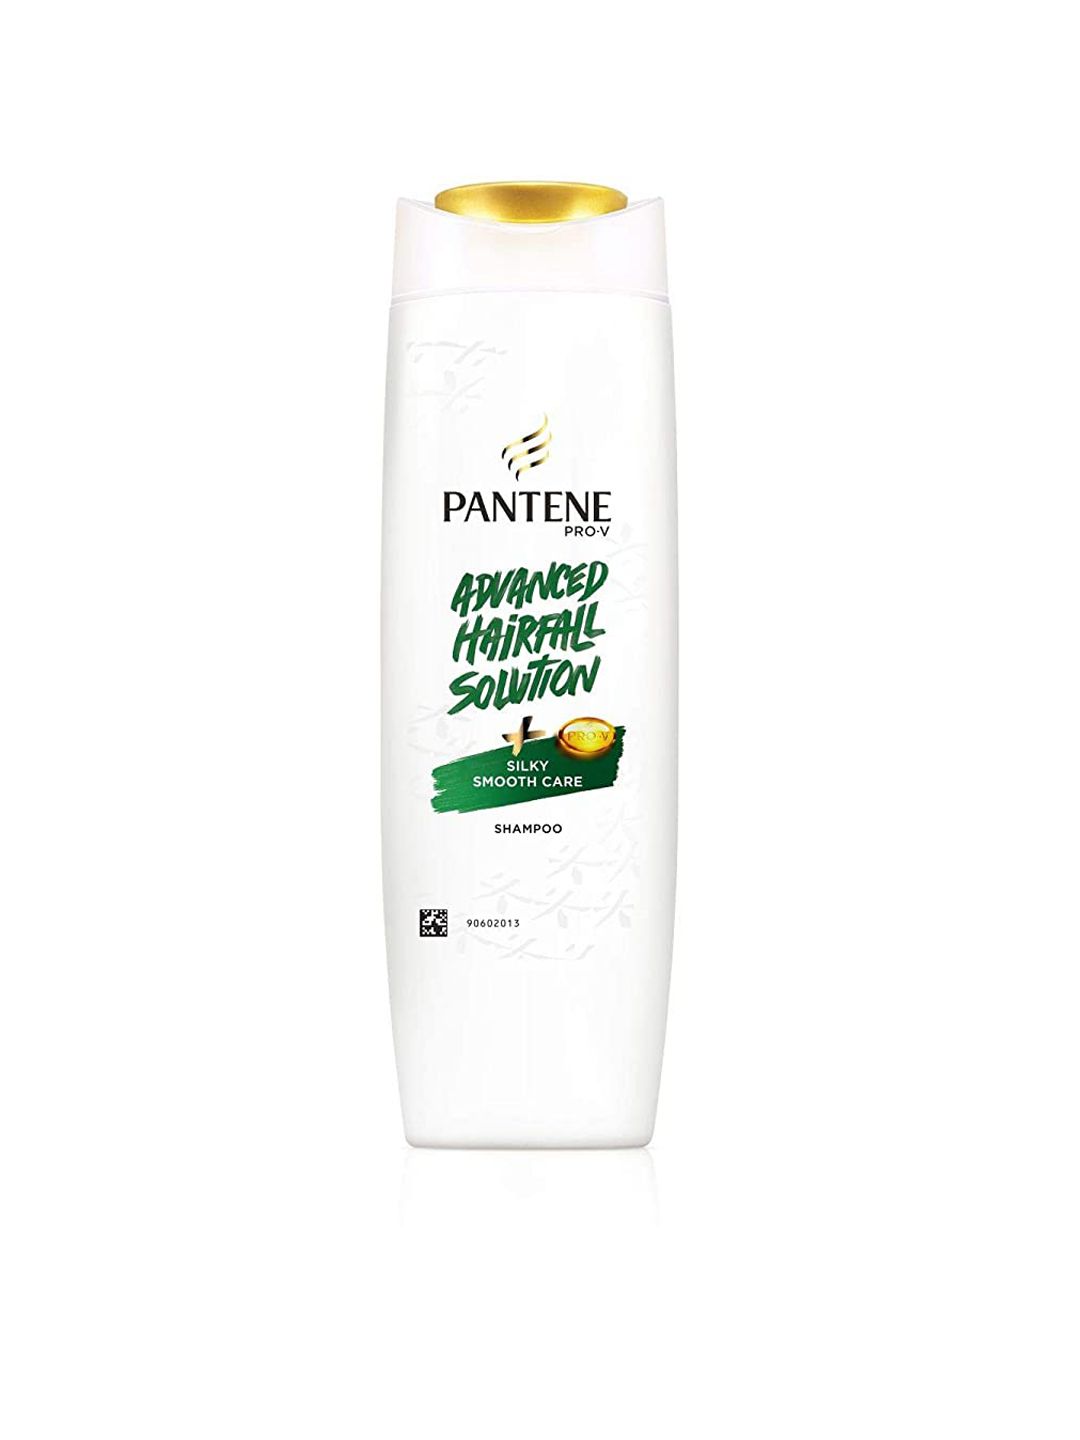 Pantene Advanced Hair Fall Solution Silky Smooth Care Shampoo 75 ml Price in India